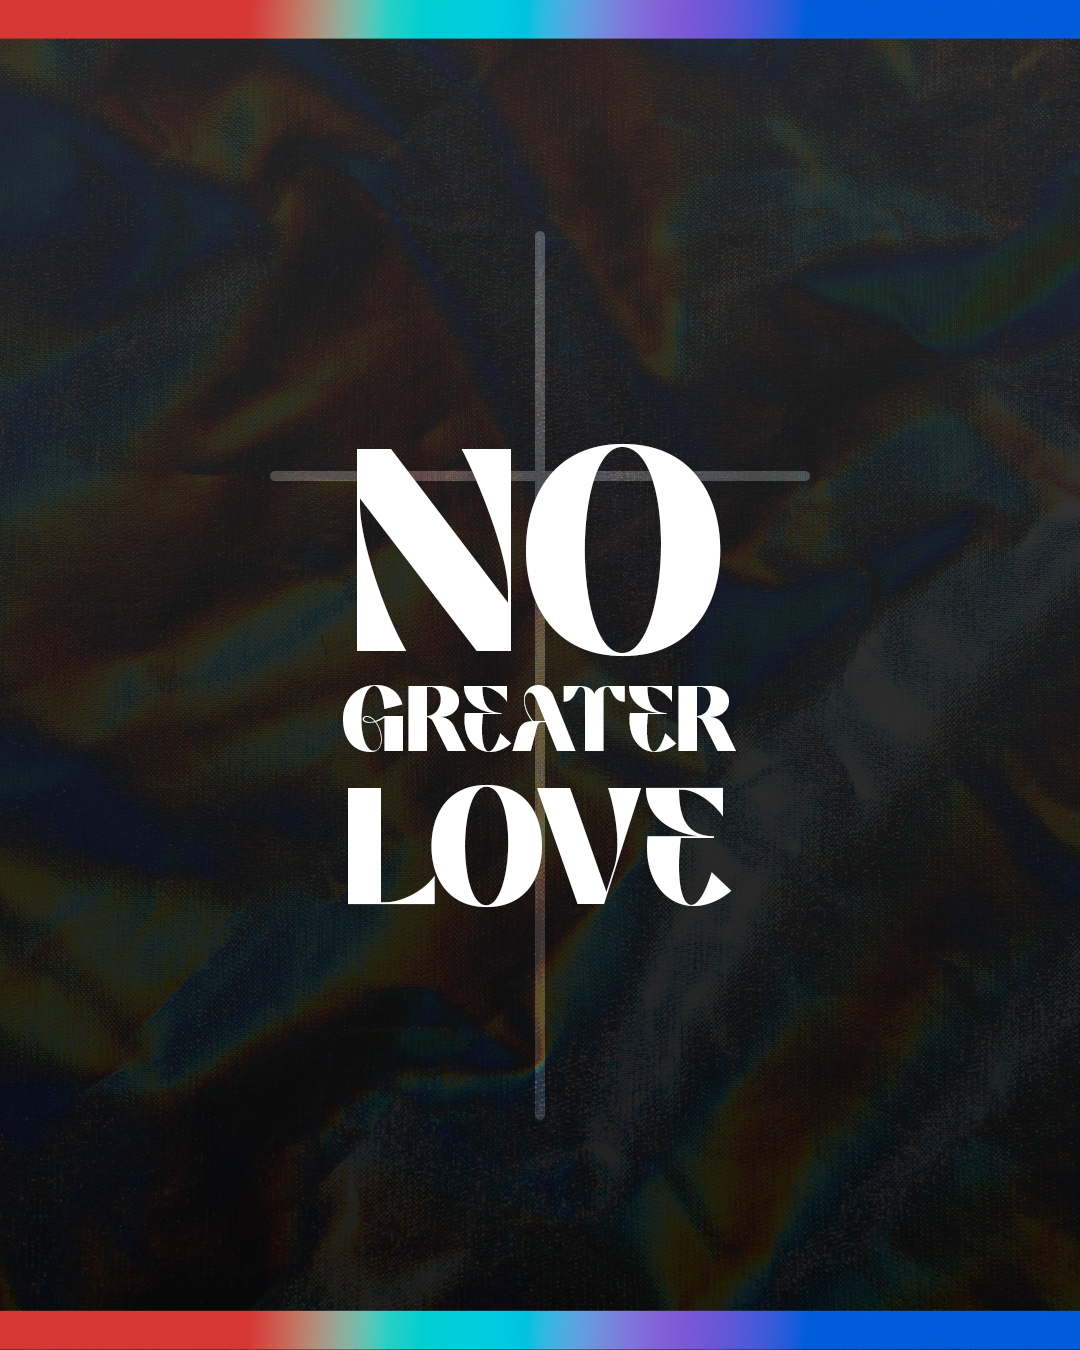 No greater love